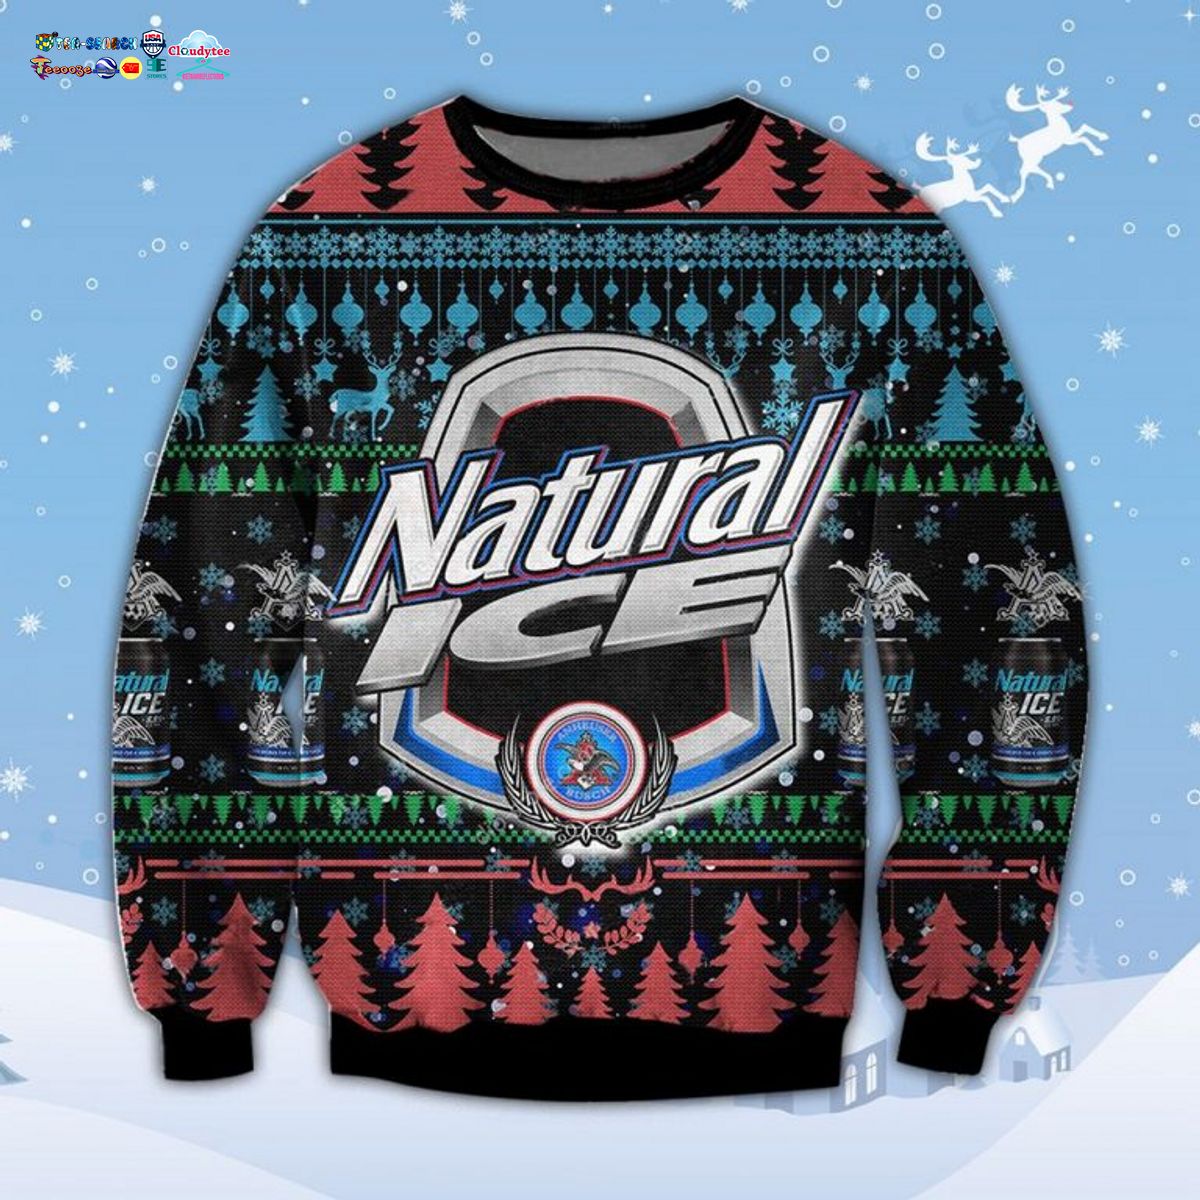 Natural Ice Ugly Christmas Sweater